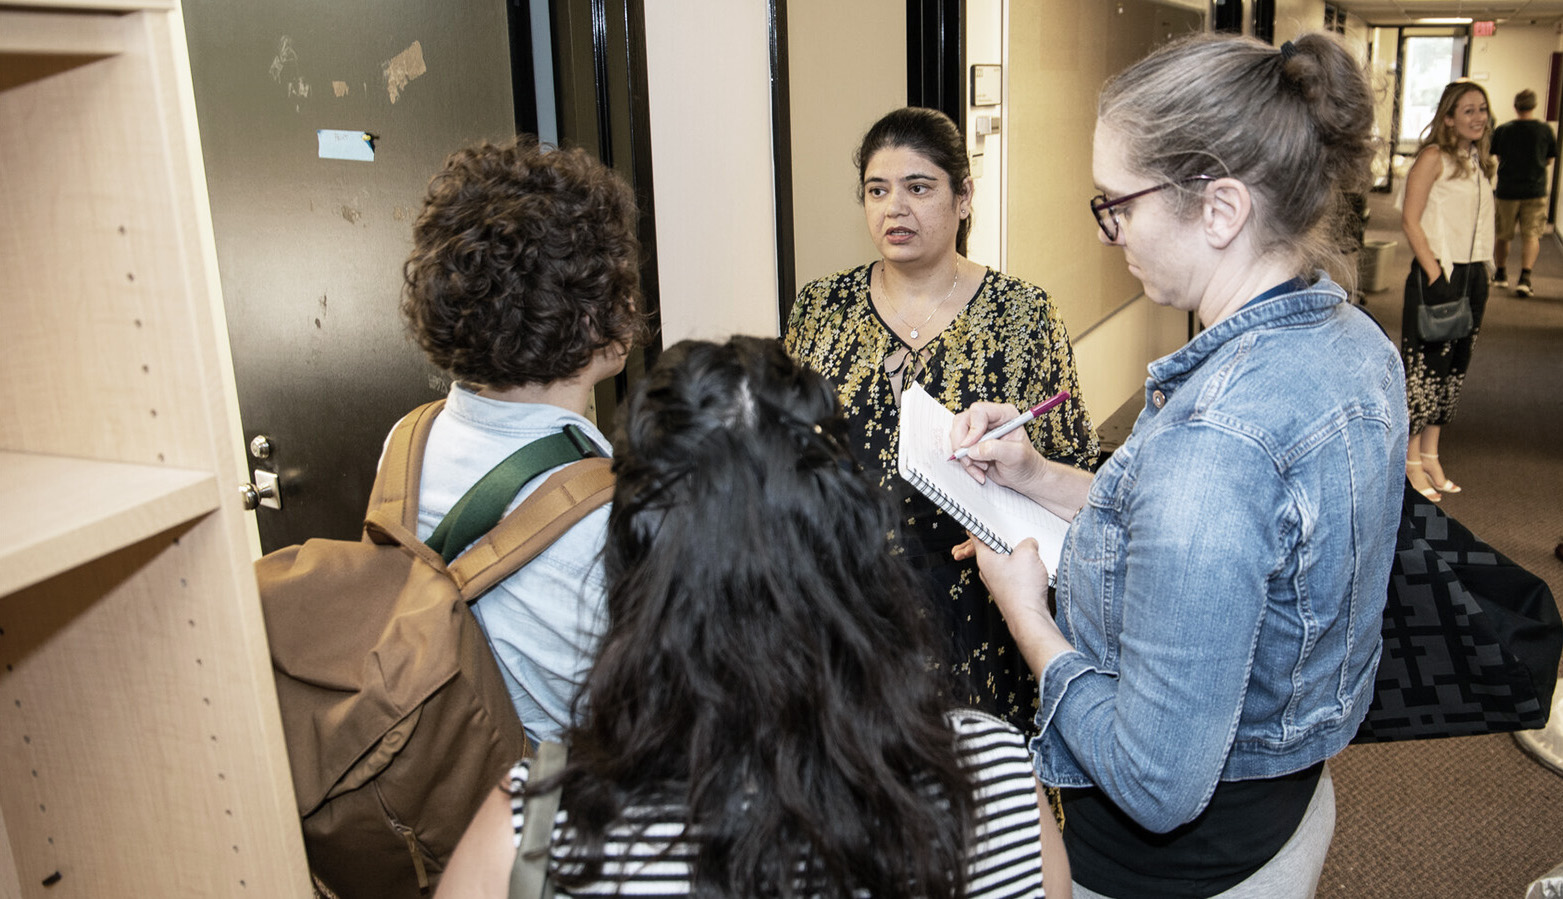 Priti Bhatia, Ivan Allen College director of faciltiies and capital planning, discusses plans for the School of Public Policy's tempoorary relocation during a visit to the Rich Computing Building.